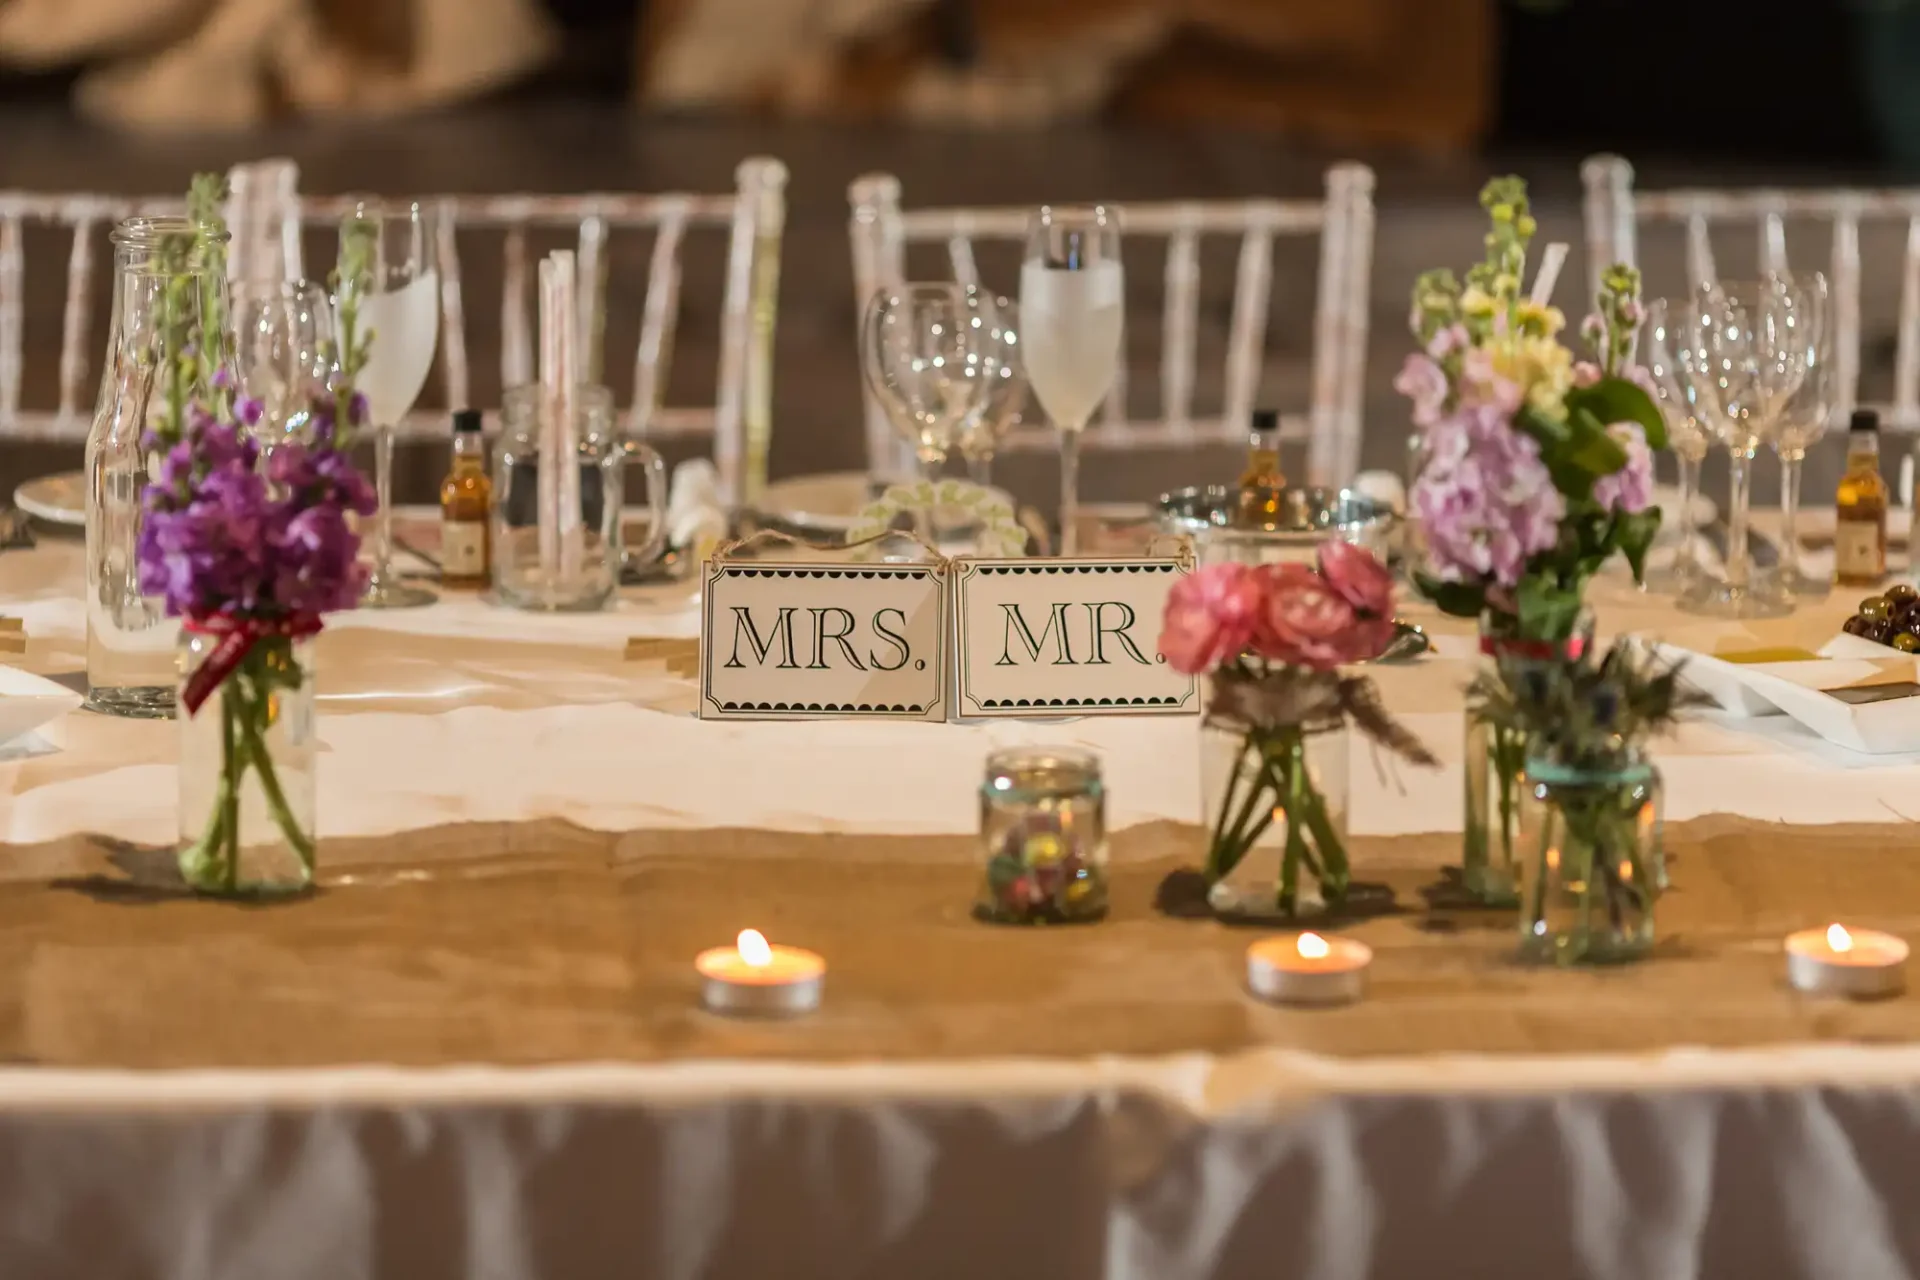 Elegant wedding table setting with "mrs." and "mr." signs, floral arrangements, candles, and multiple glasses.